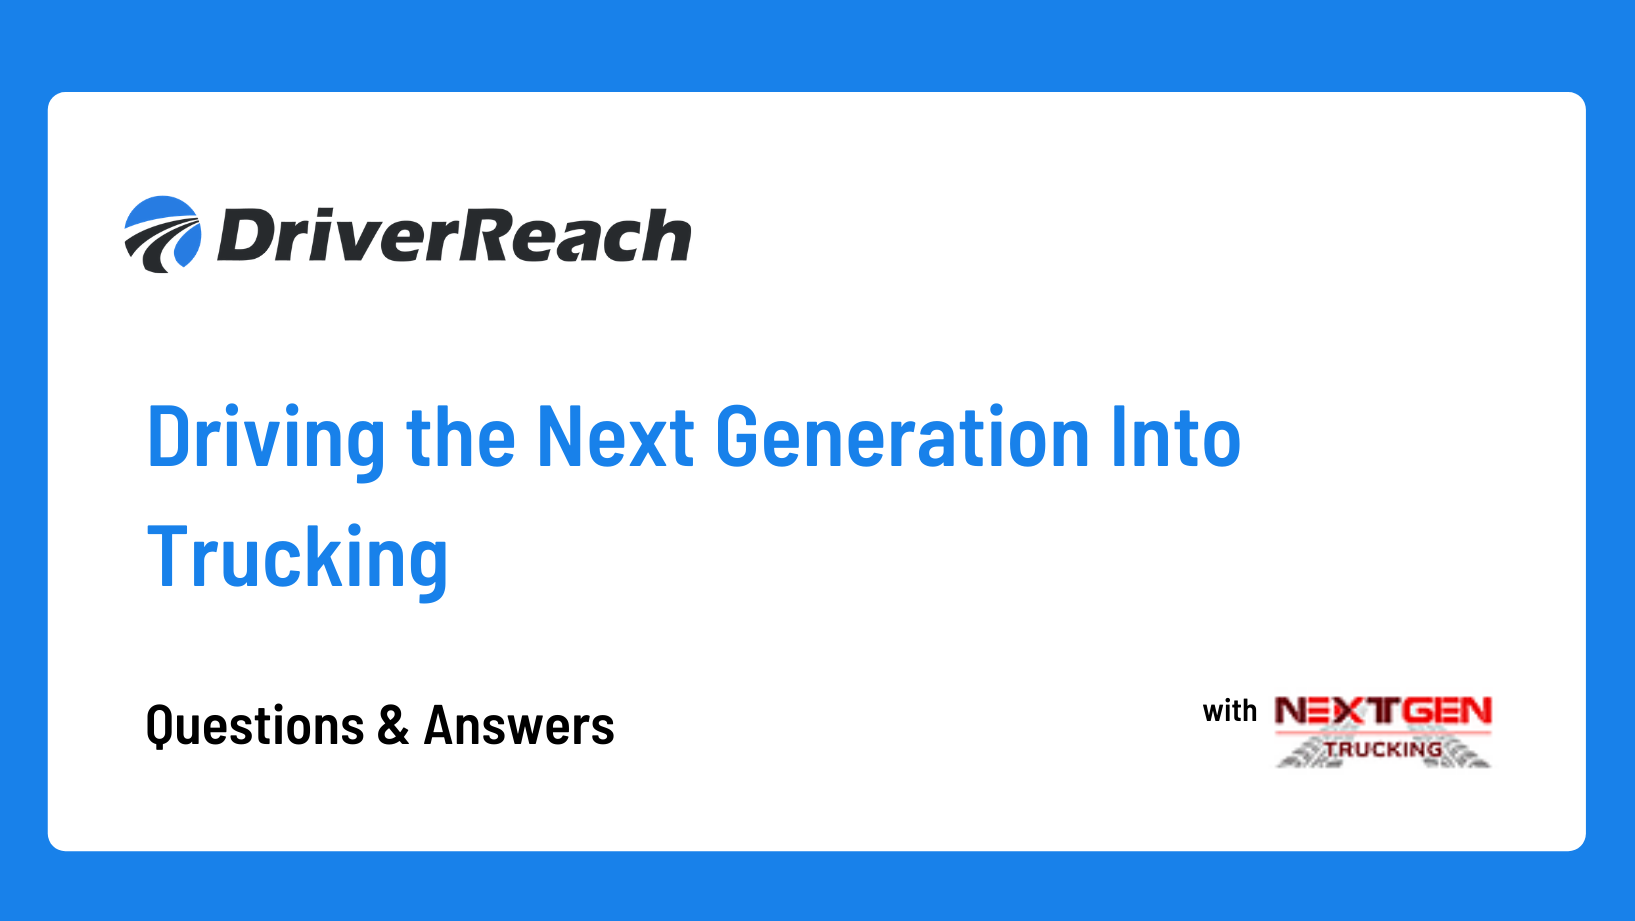 Webinar Q&A: “Driving the Next Generation Into Trucking” 